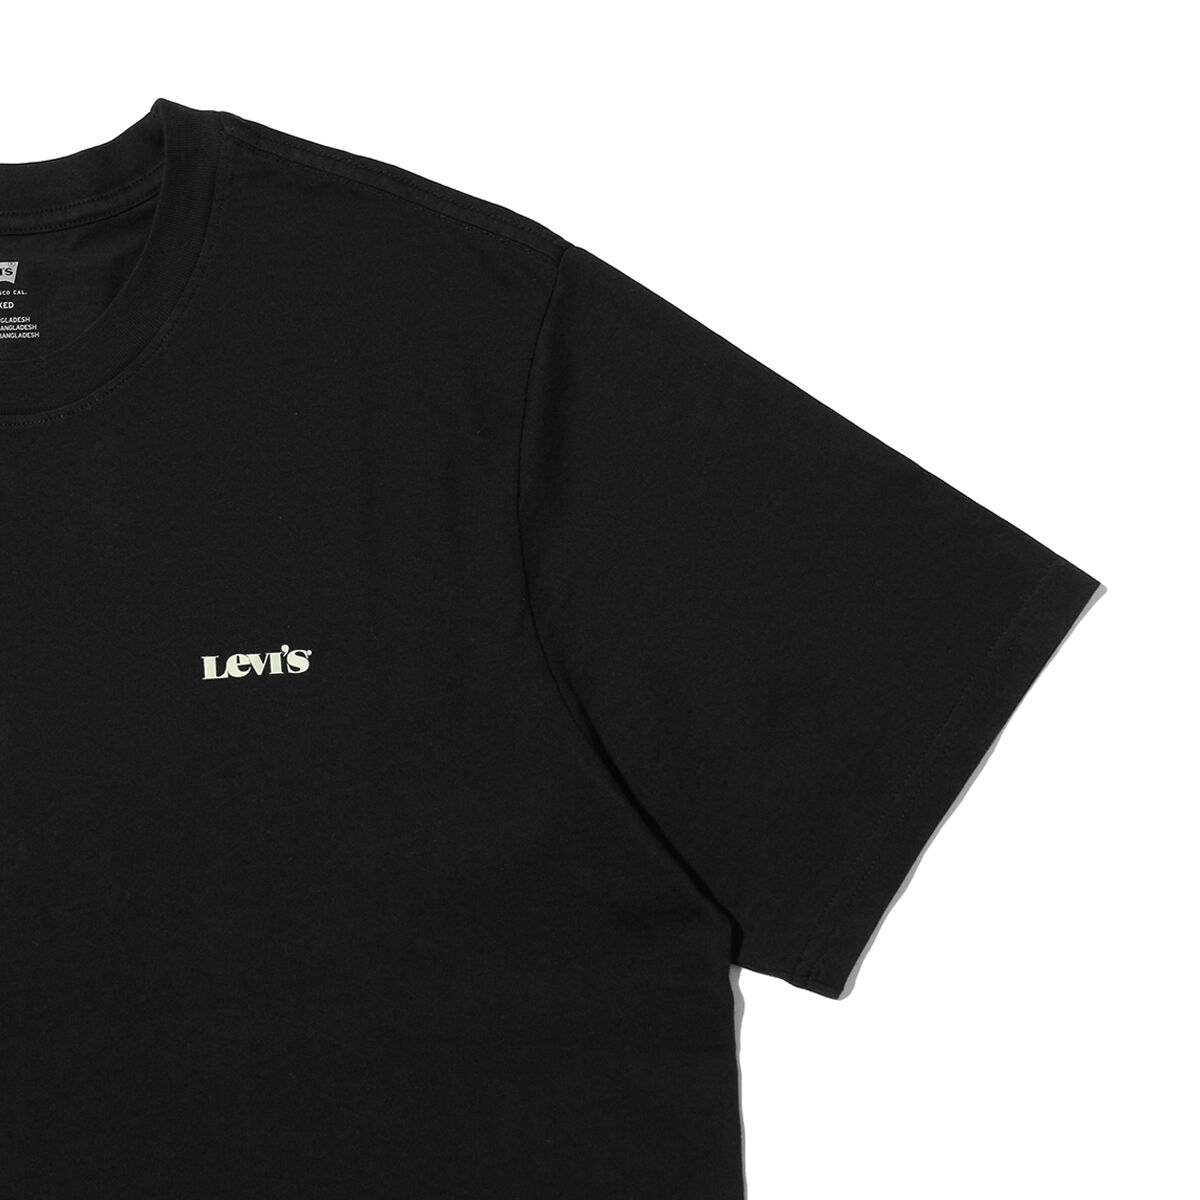 RELAXED FIT SS LOGO Tシャツ CAVIAR｜リーバイス® 公式通販